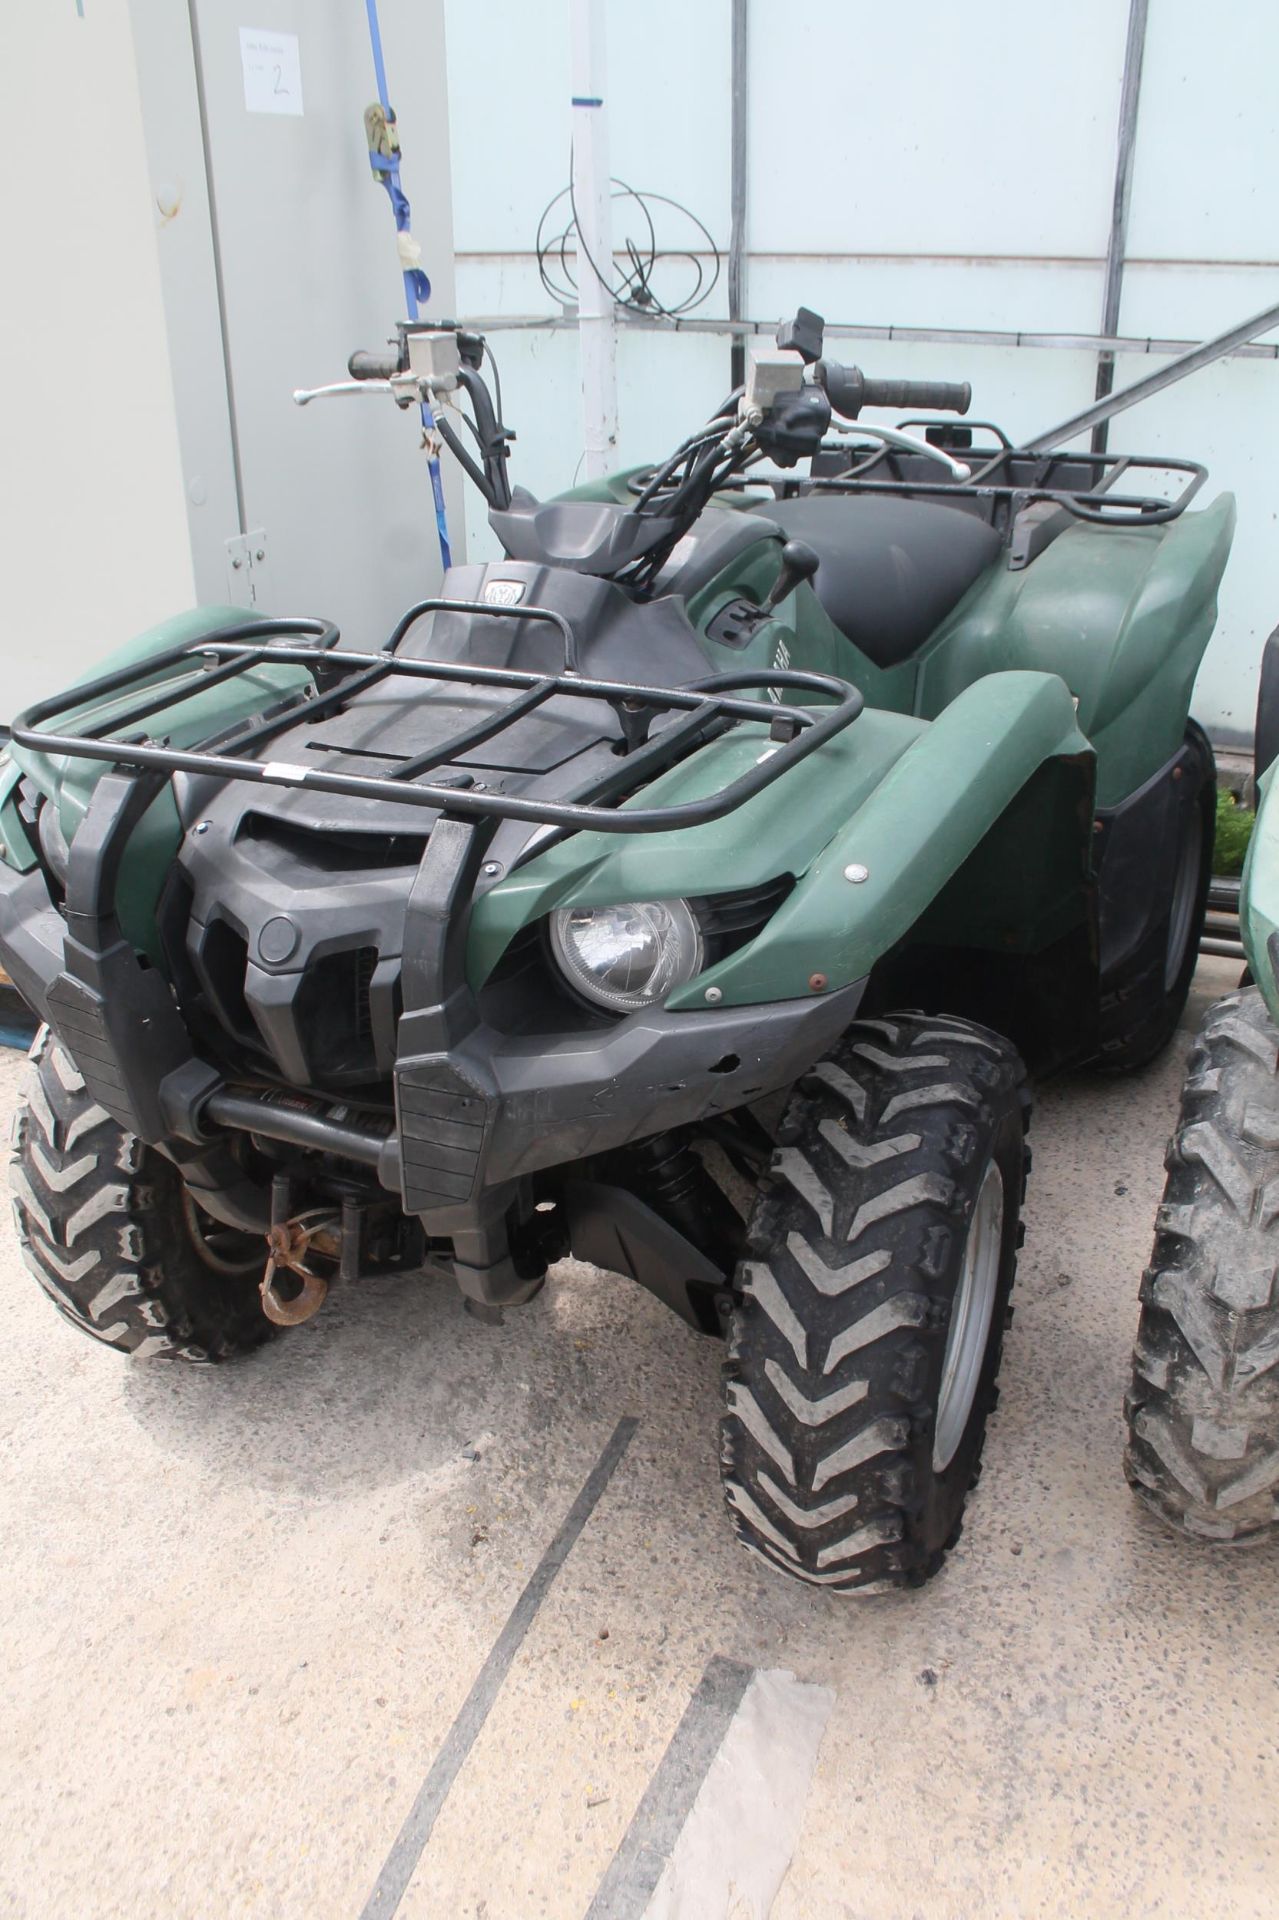 2015 YAMAHA GRIZZLY 550 IRS QUAD BIKE, ROAD LEGAL, AUTOMATIC, POWER STEERING, REG NUMBER WA15 CJX,